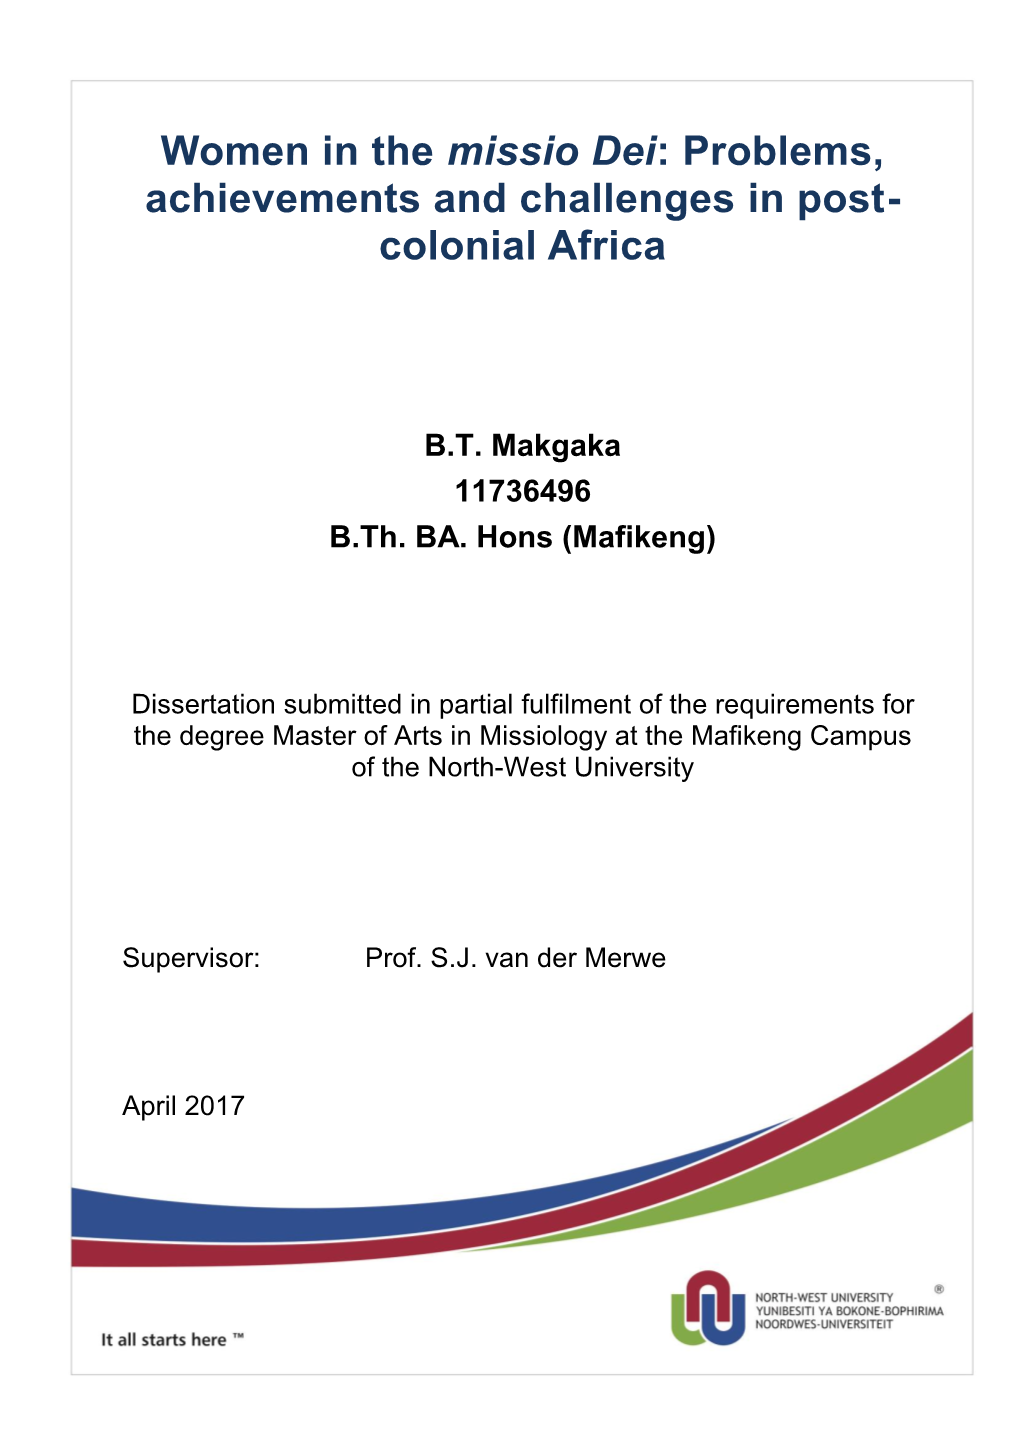 Women in the Missio Dei: Problems, Achievements and Challenges in Post- Colonial Africa